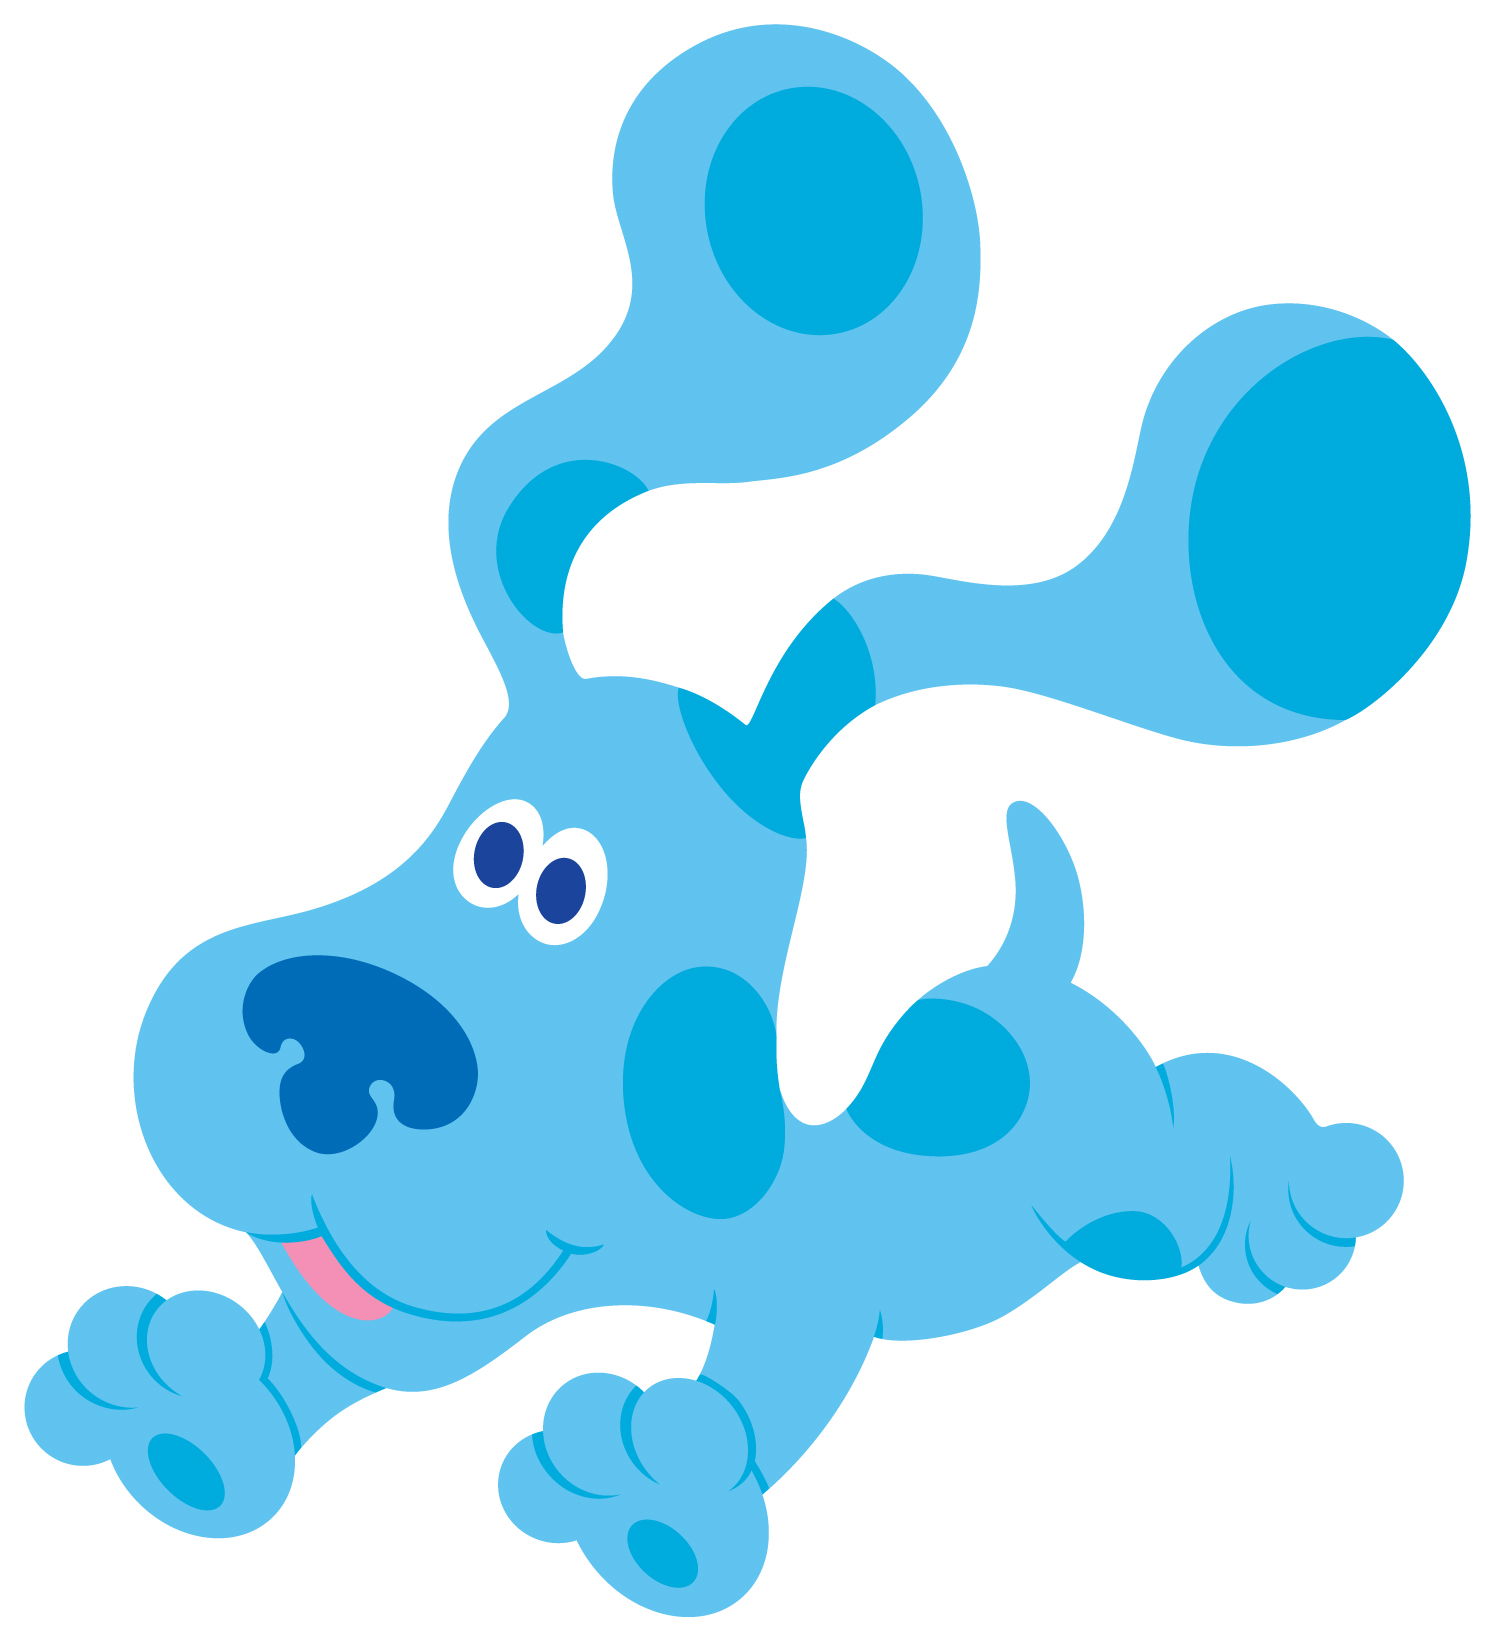 10 Blues Clues Free Cliparts That You Can Download To You Computer And